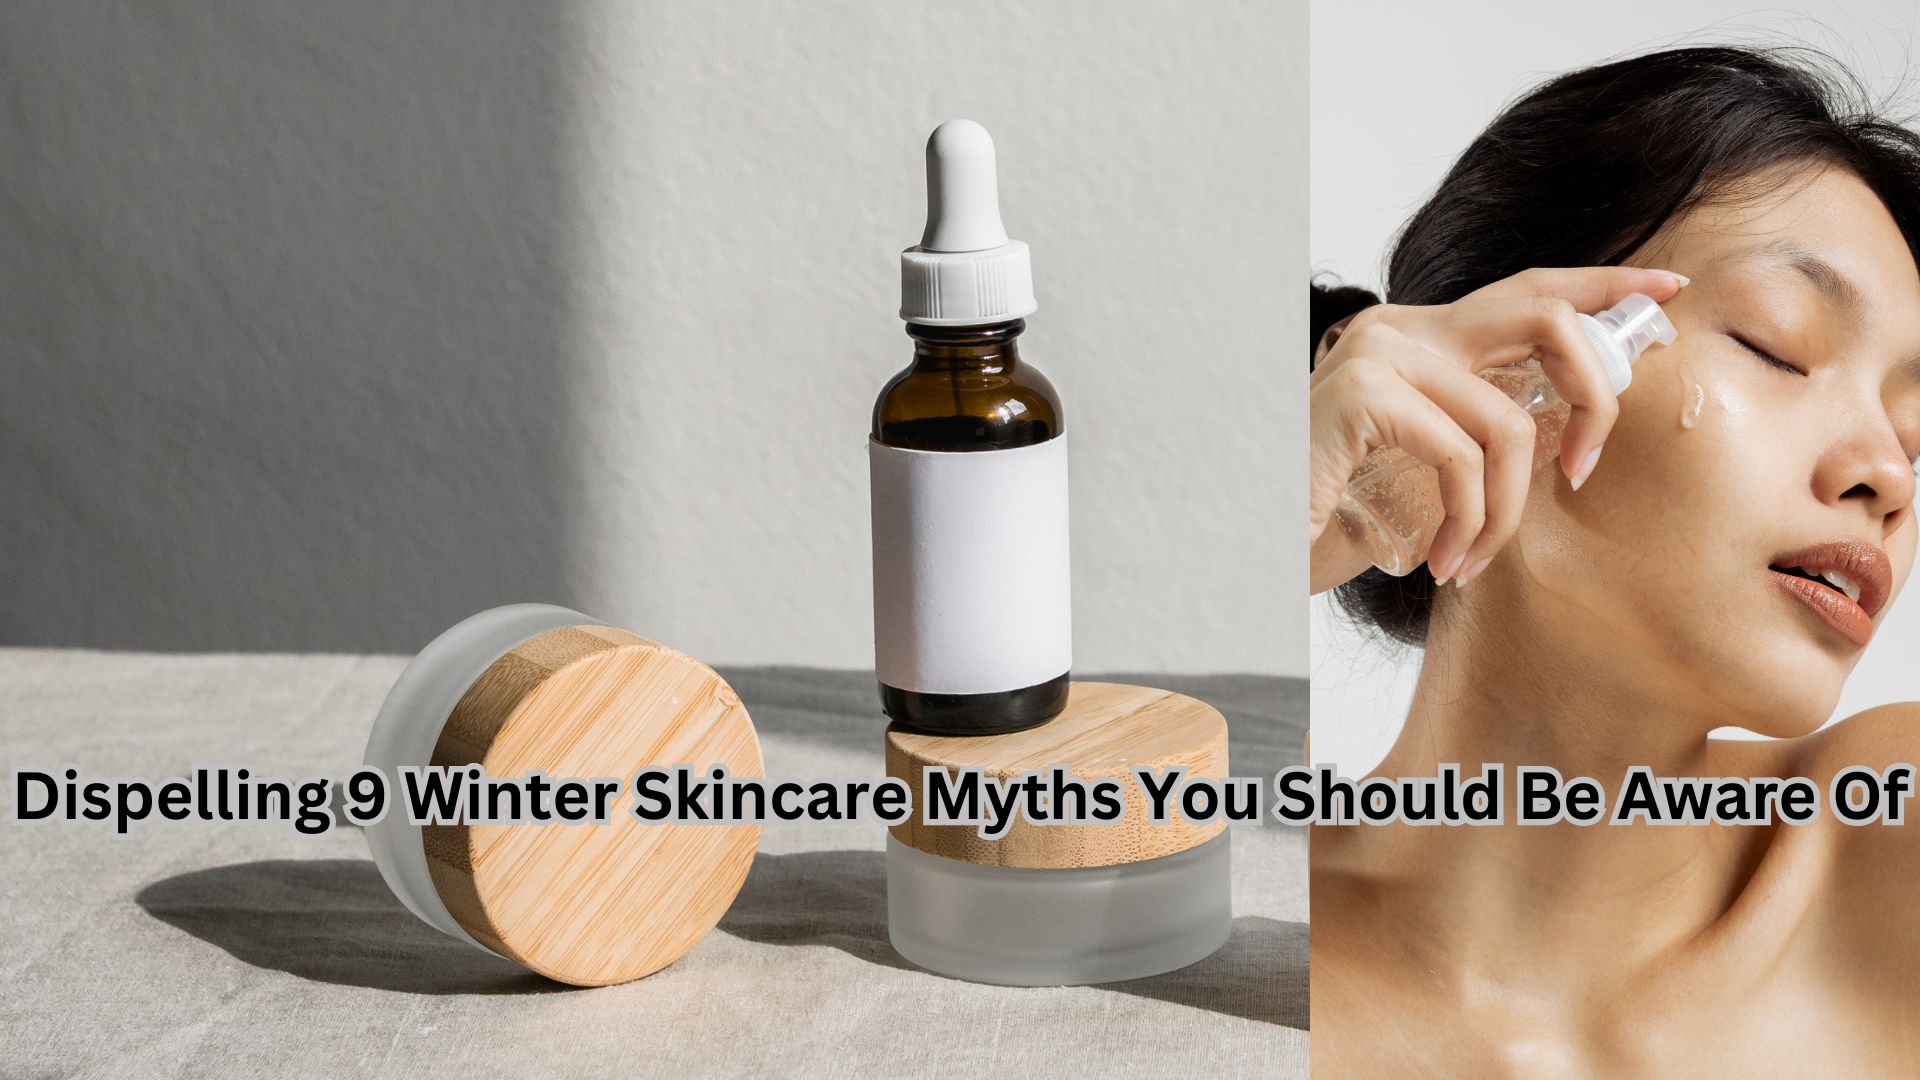 Dispelling 9 Winter Skincare Myths You Should Be Aware Of